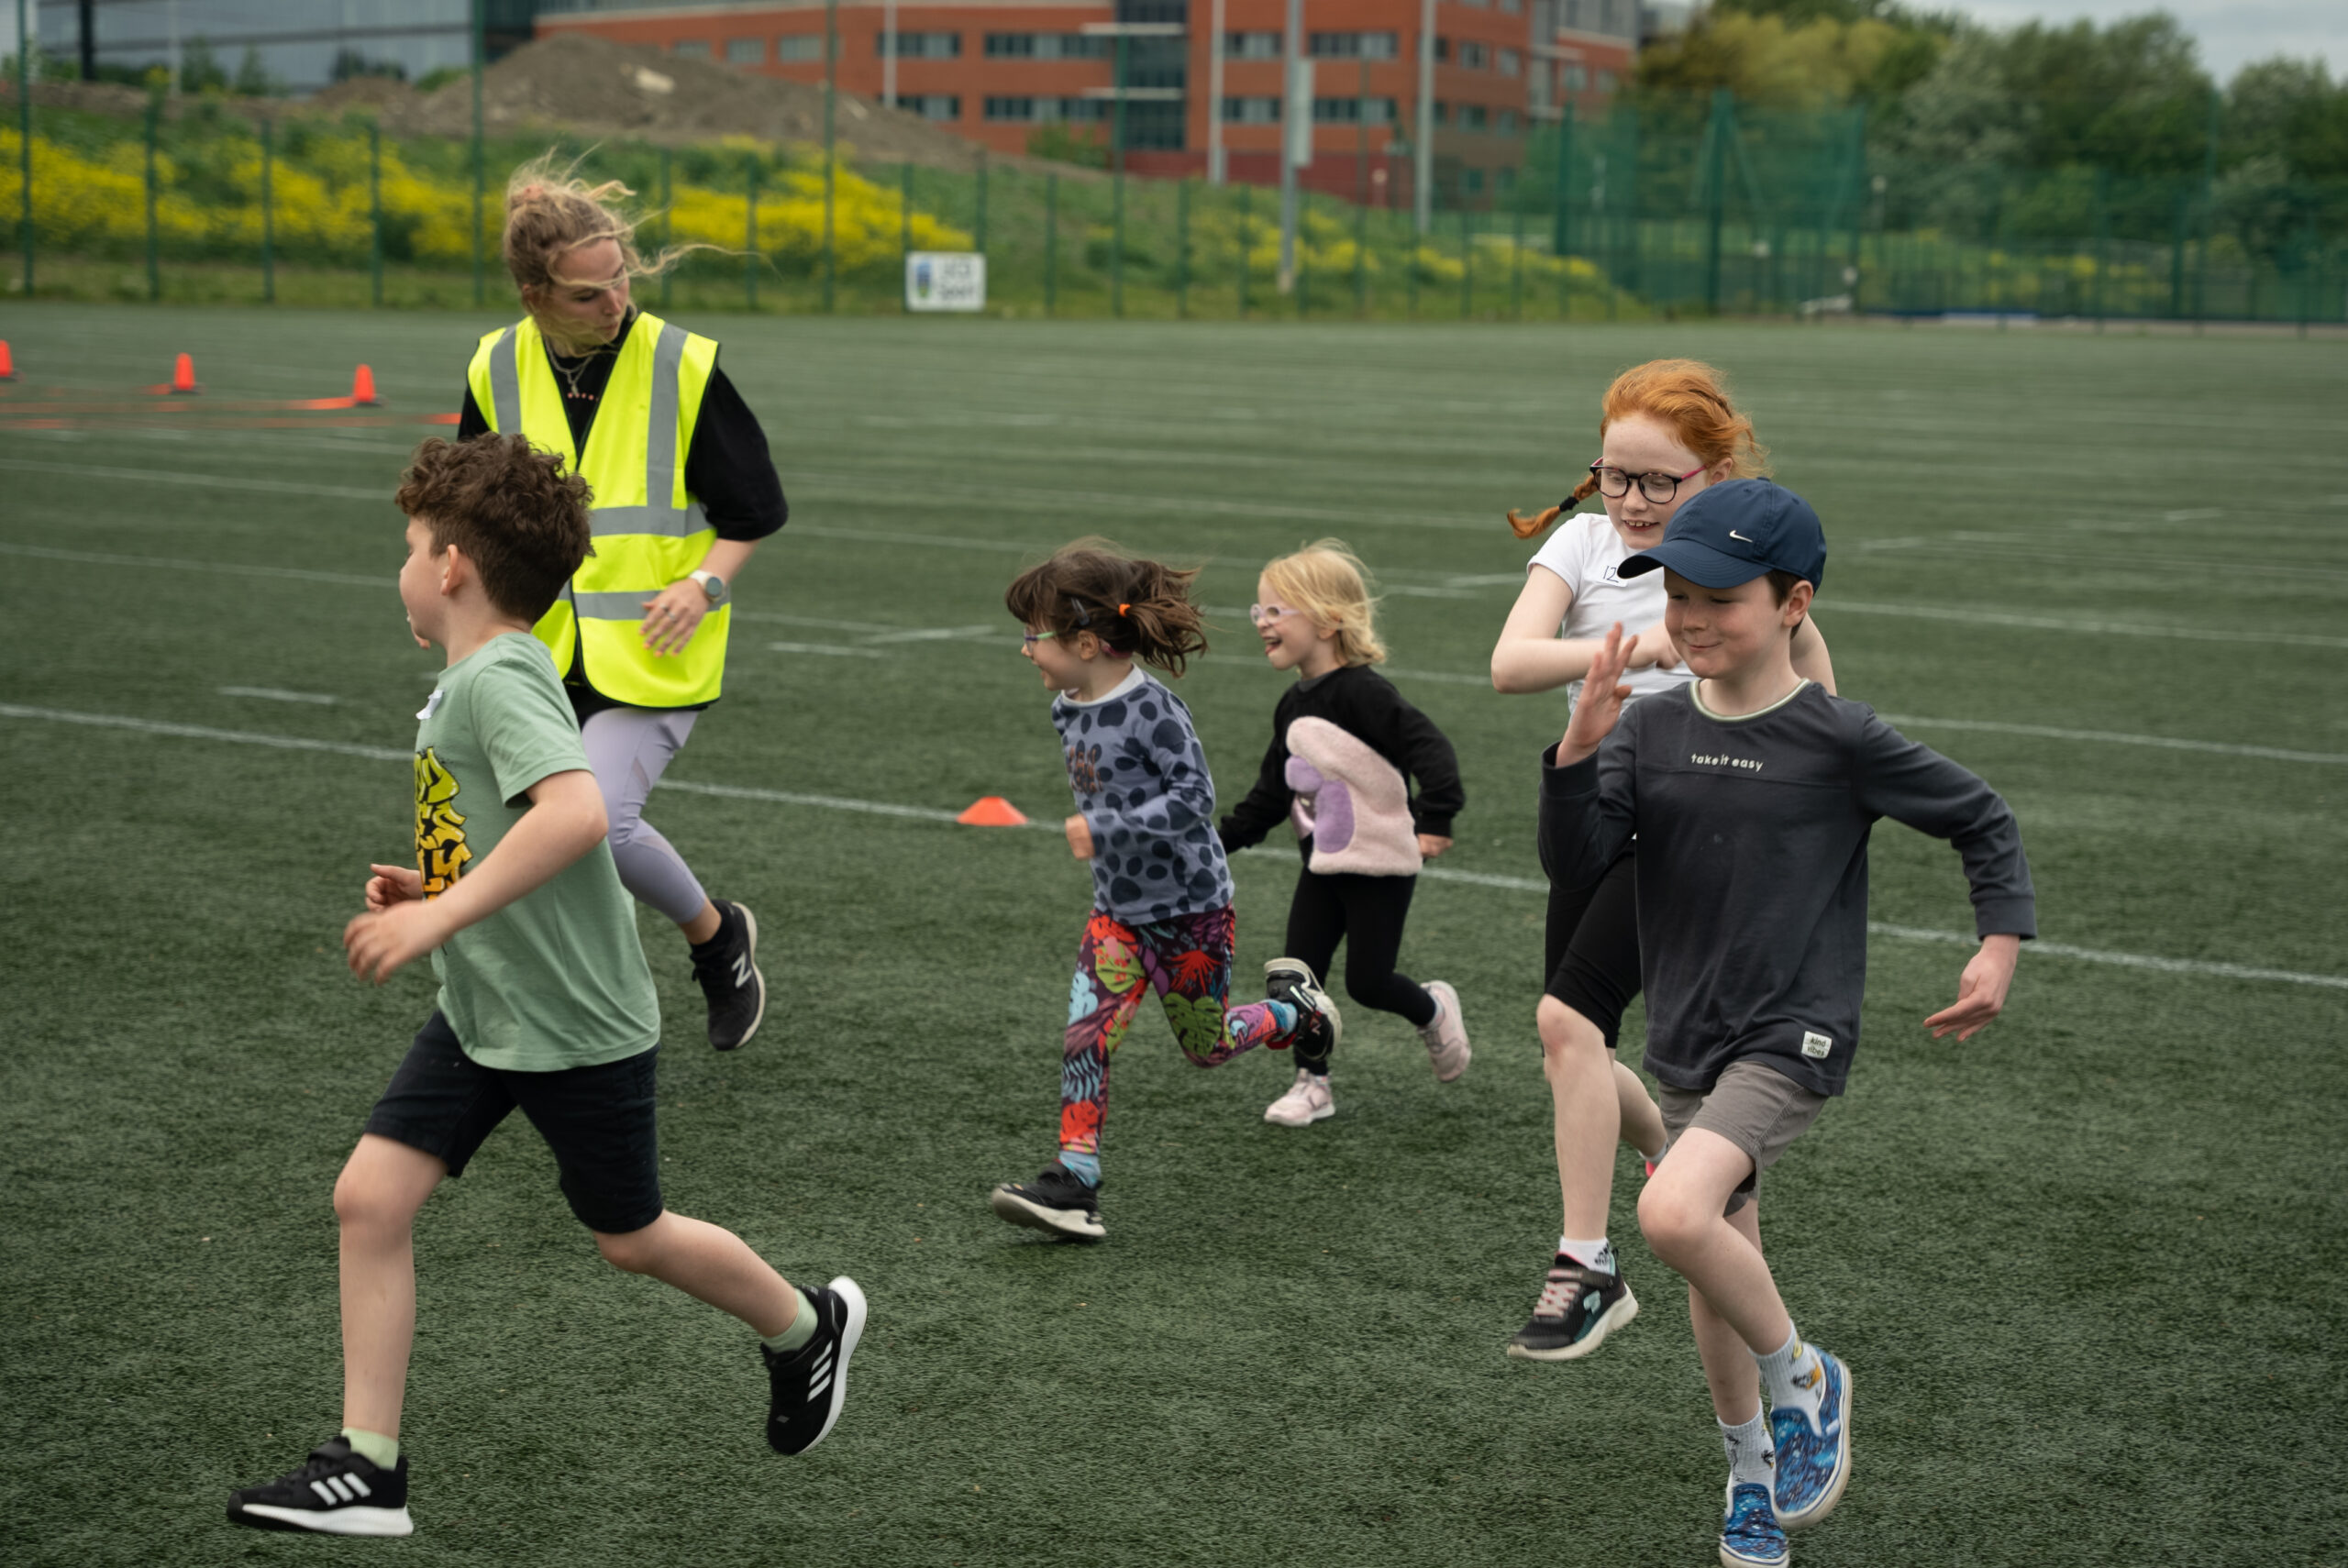 photo of six kids, three boys and three girls running on a rugby pitch